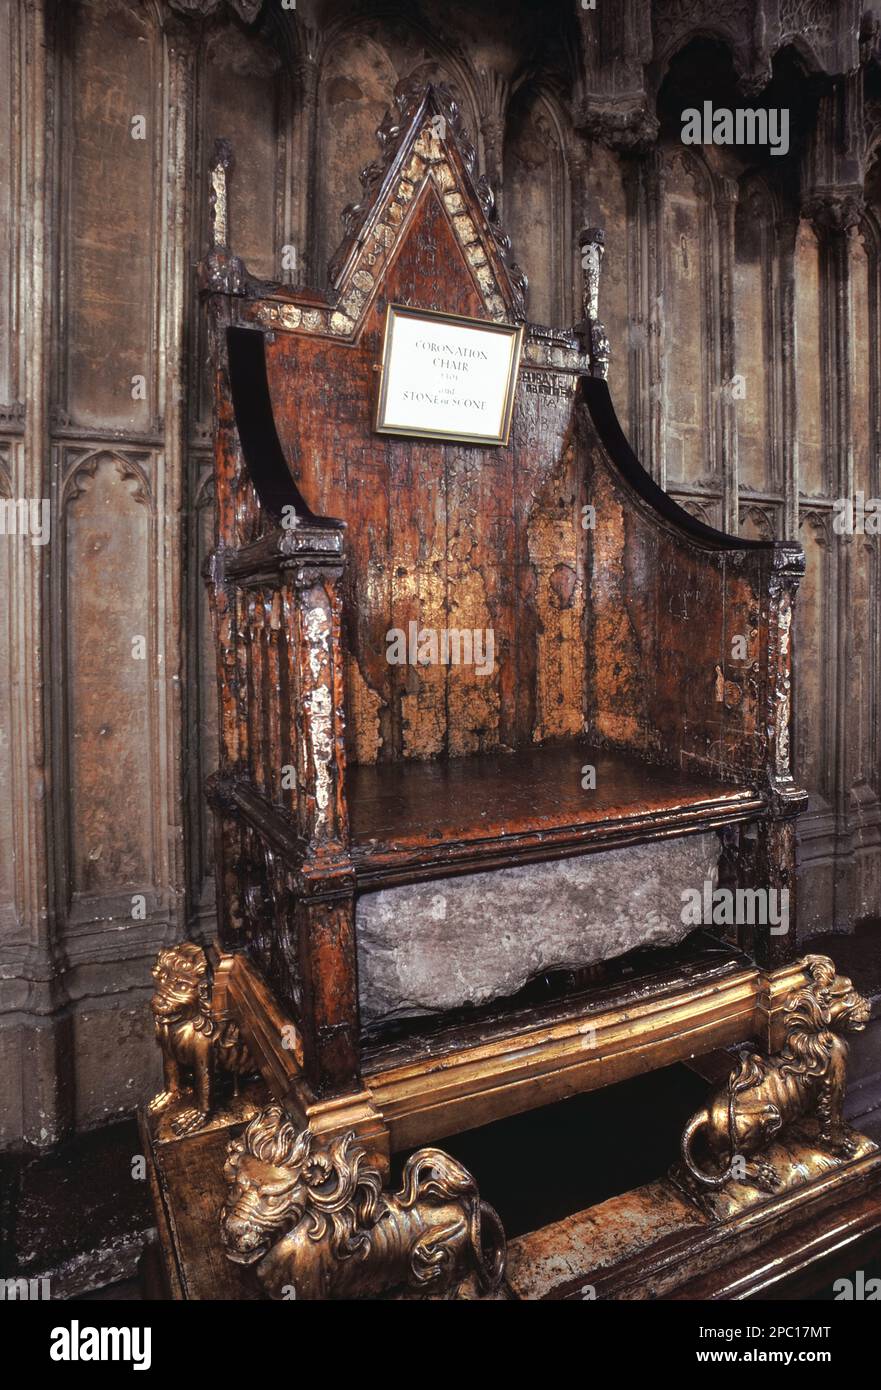 The Coronation Chair, known historically as St Edward's Chair or King Edward's Chair containing the coronation stone of Scotland—known as the Stone of Destiny. Westminster Abbey, London, England, UK Stock Photo